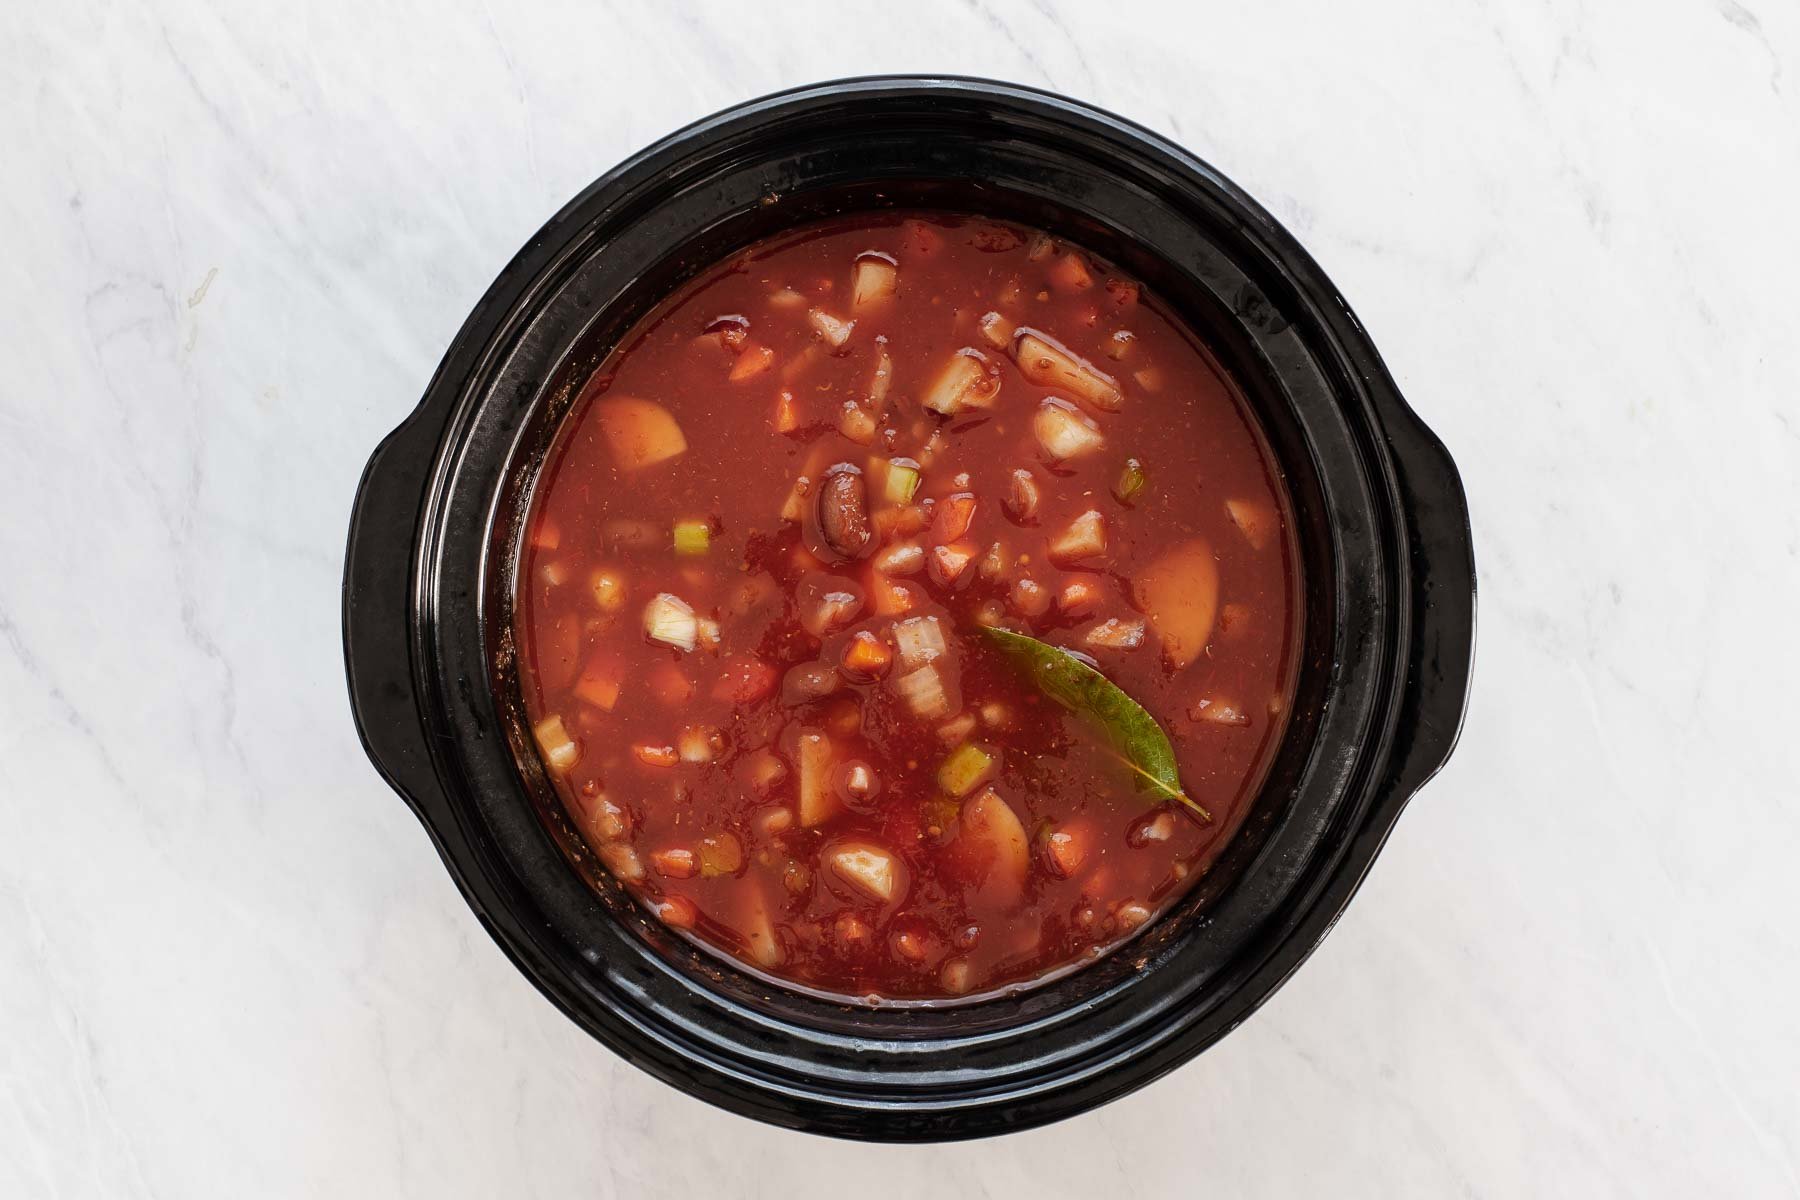 Tomato broth vegetable bean soup in black round slow cooker.